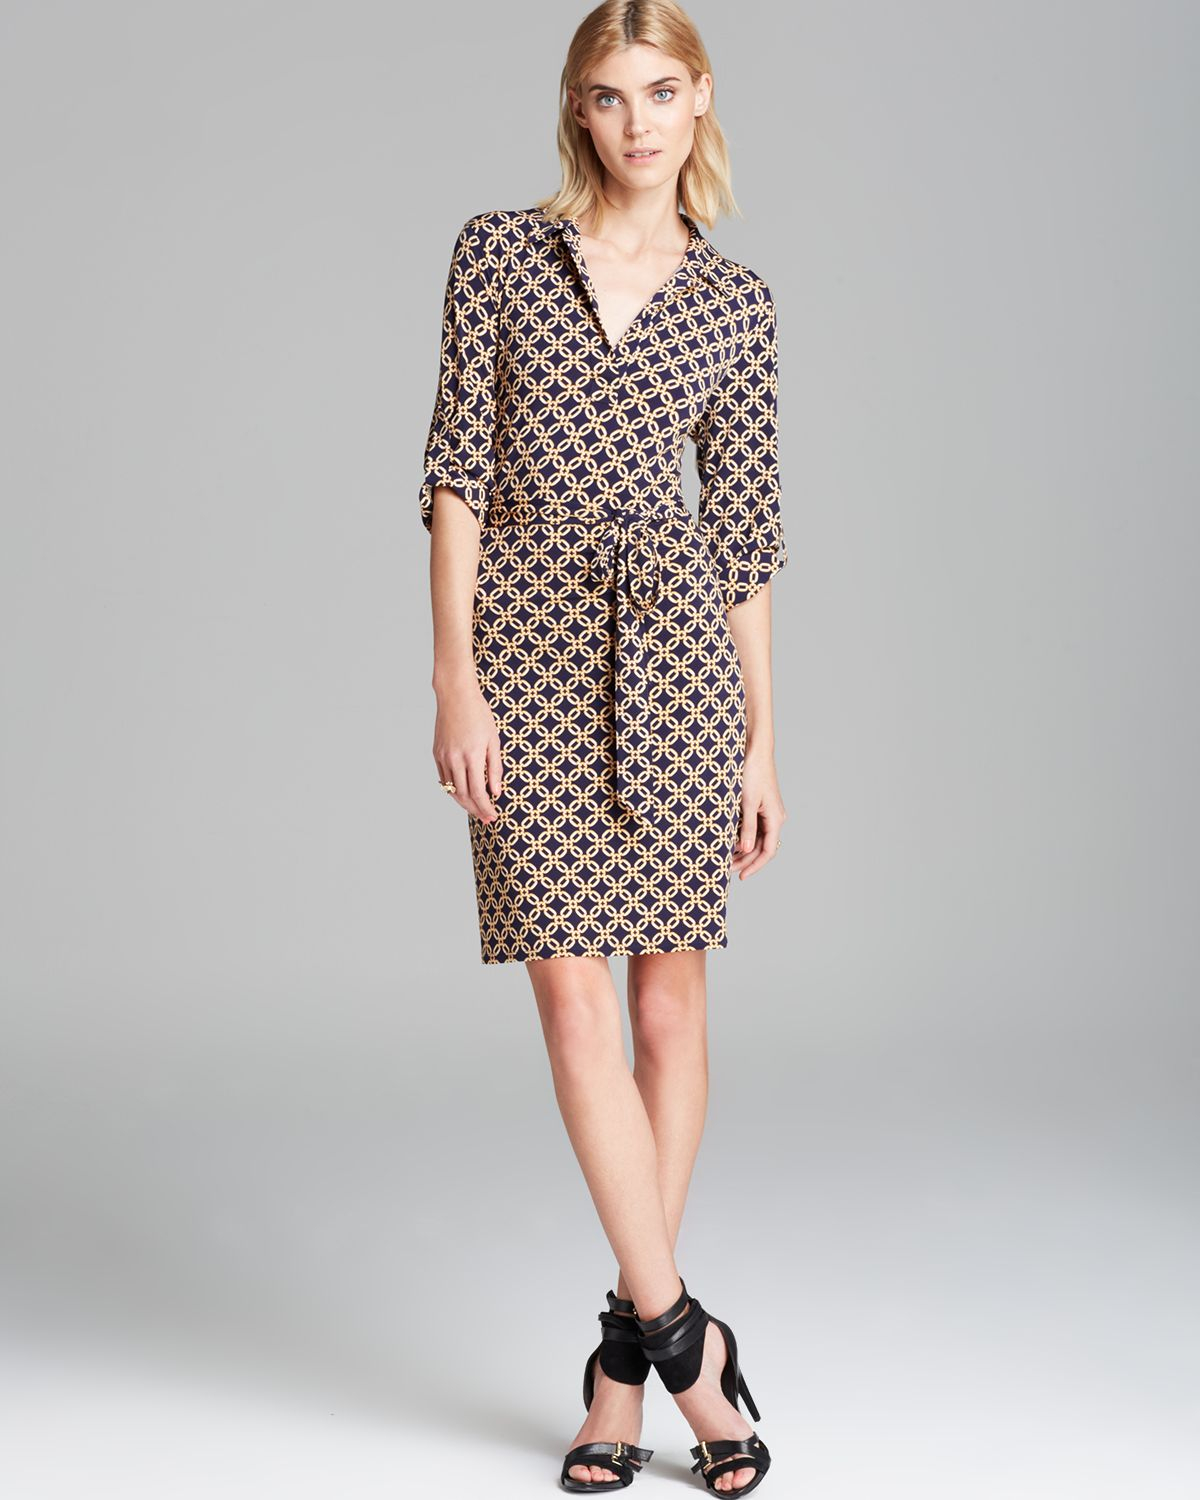 Lyst - Laundry By Shelli Segal Shirt Dress Three Quarter Sleeve Belted ...